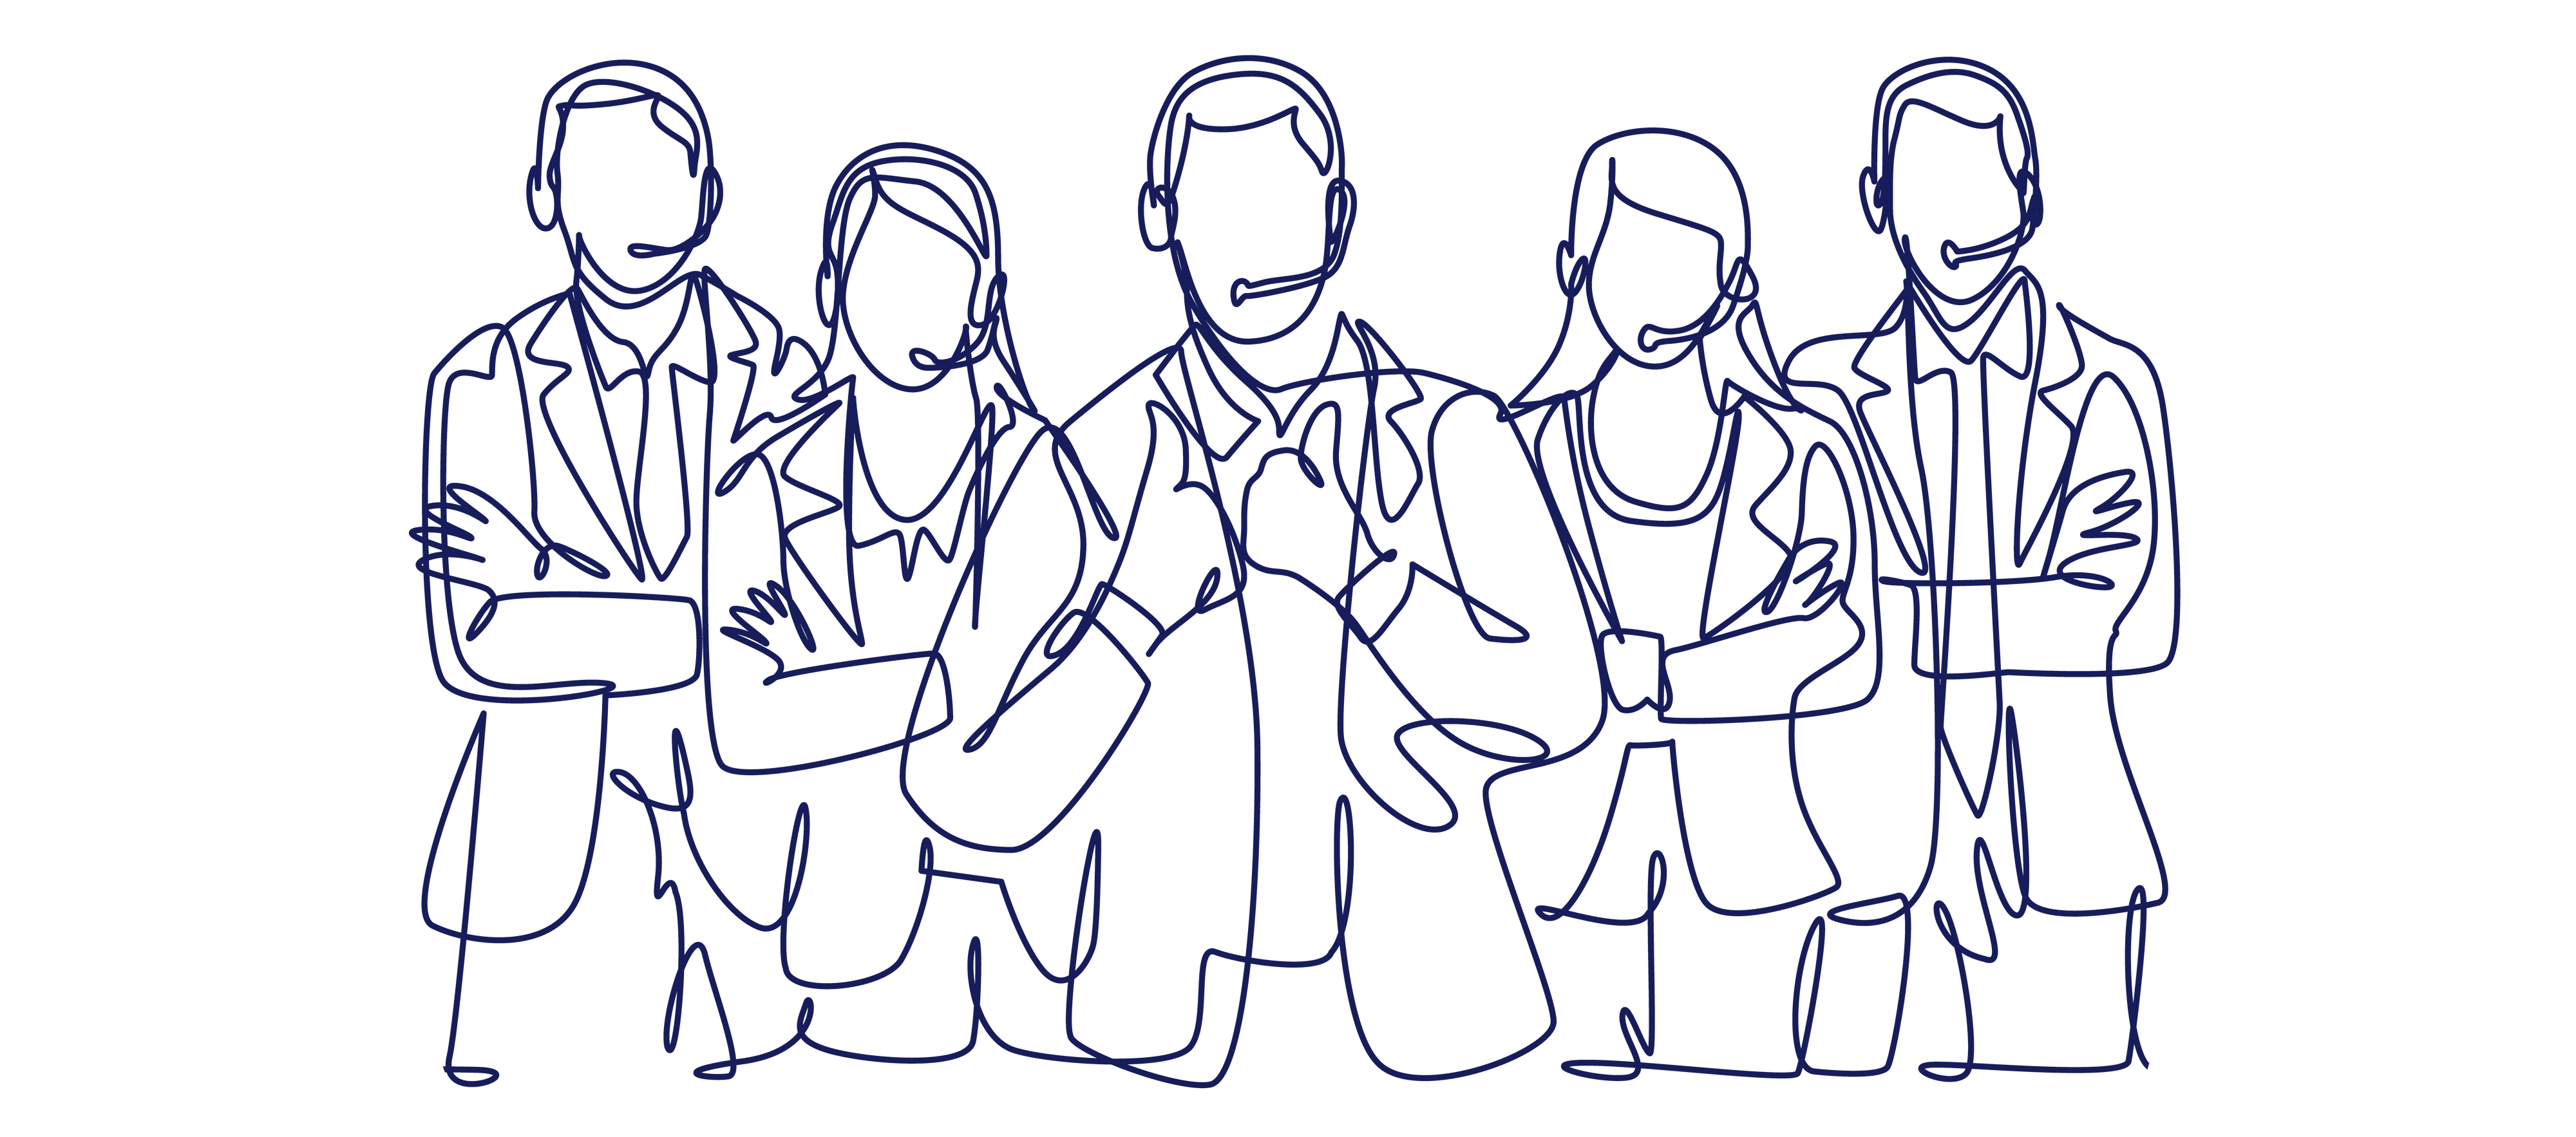 Cartoon drawing of support team standing together